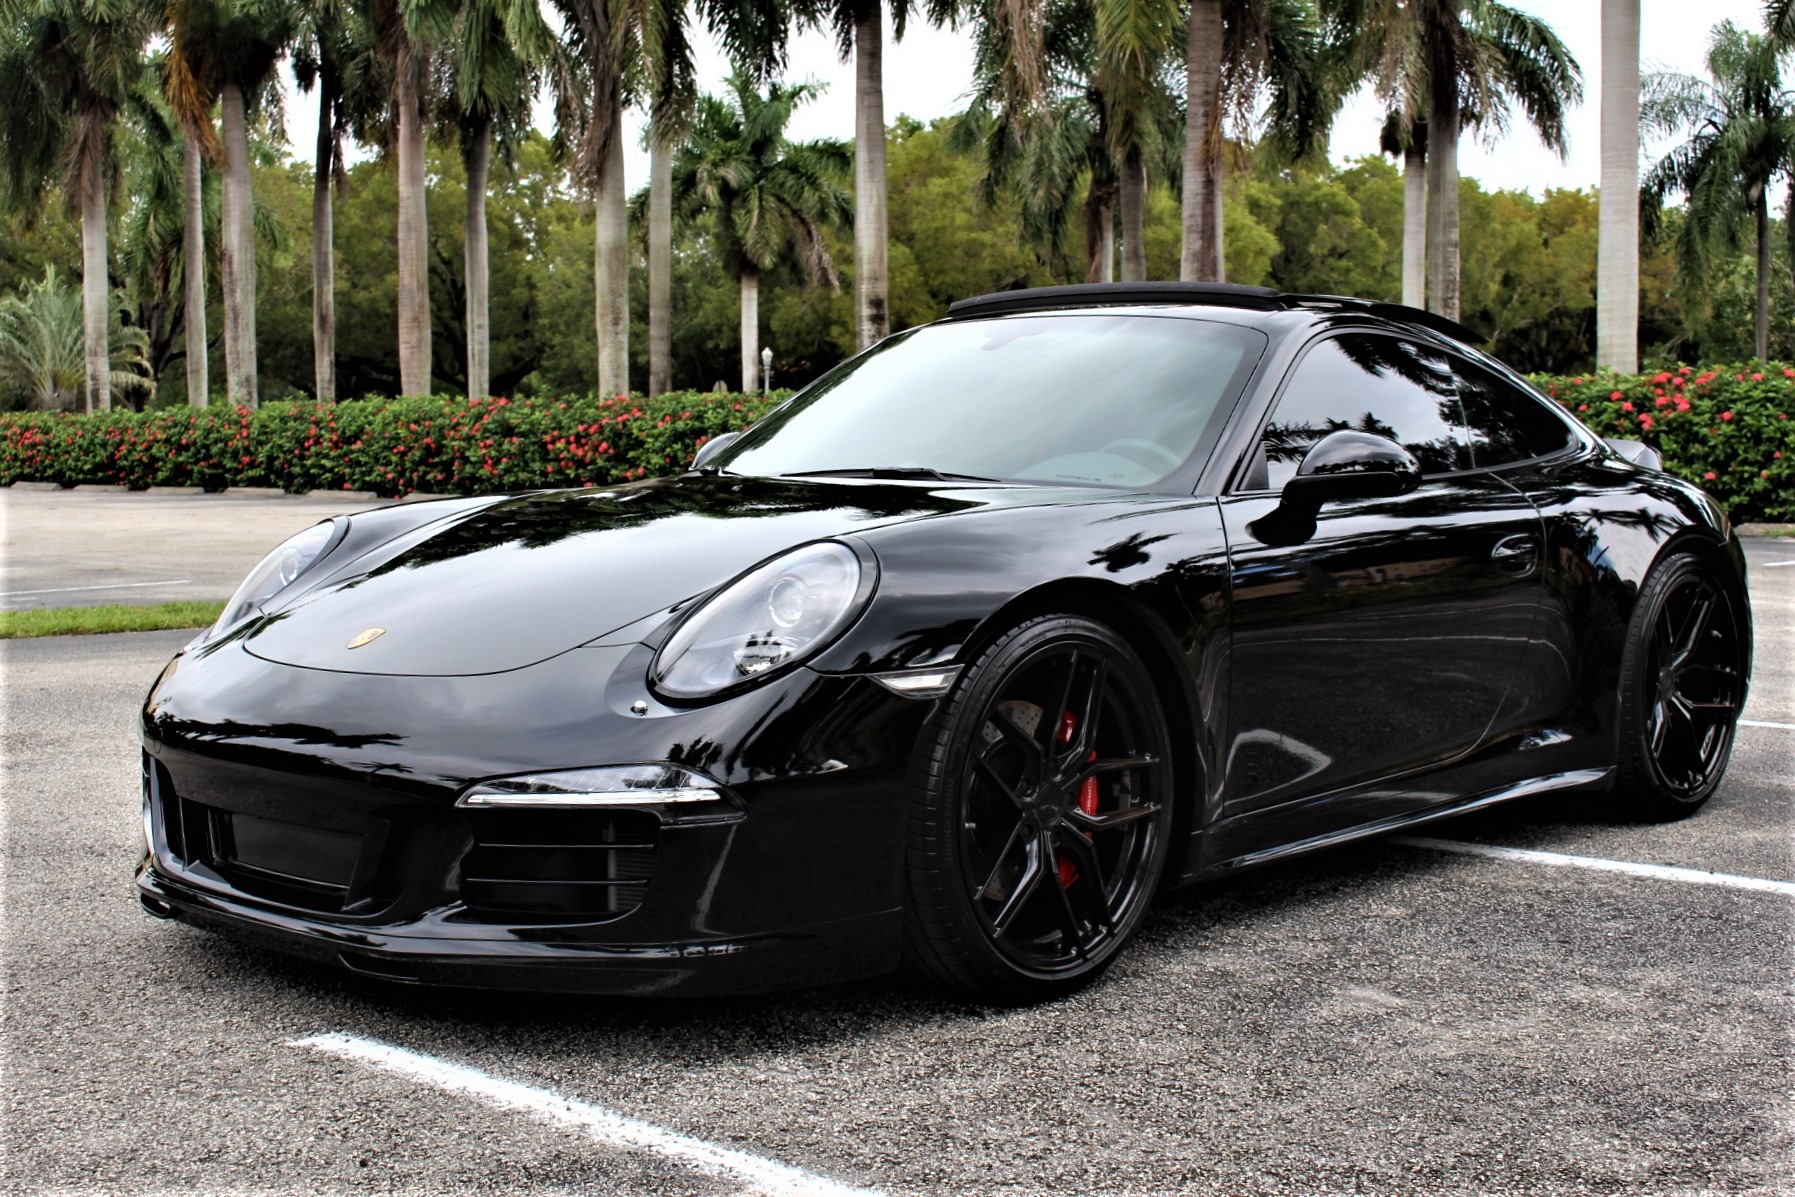 Used 2013 Porsche 911 Carrera 4S for sale Sold at The Gables Sports Cars in Miami FL 33146 4